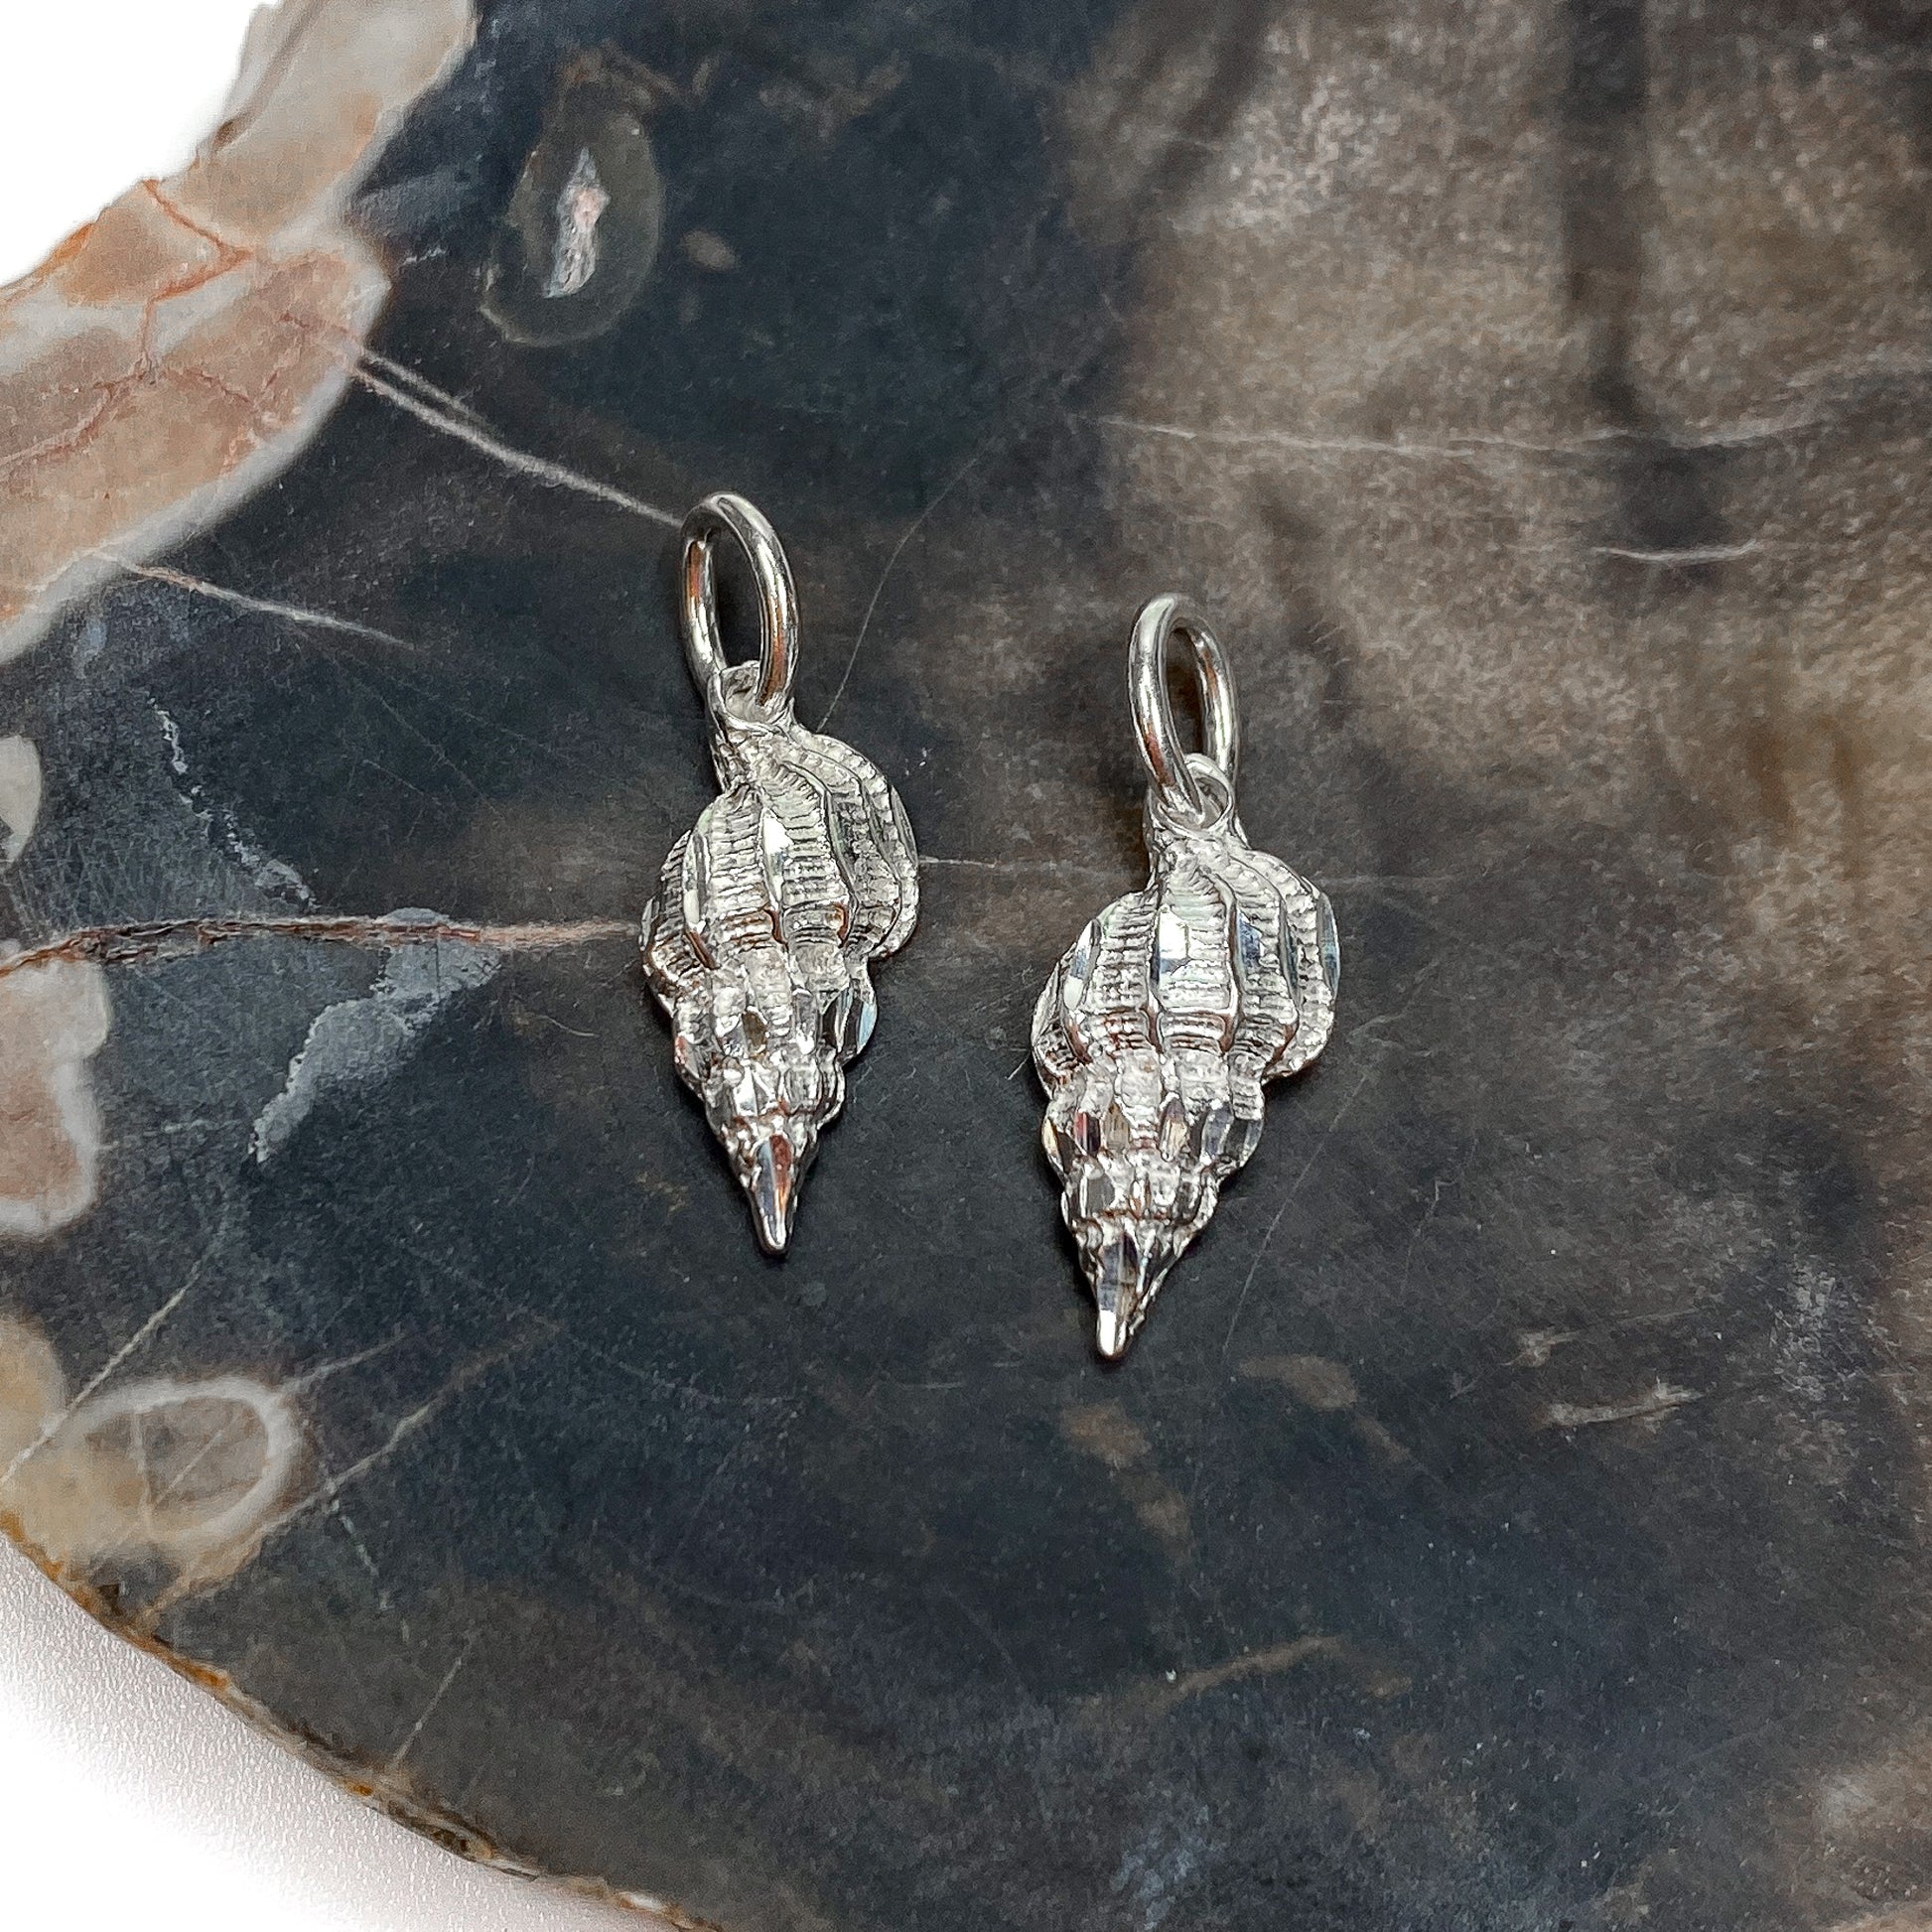 Spire Shell Charm (Sterling Silver) - 1 pc.-The Bead Gallery Honolulu